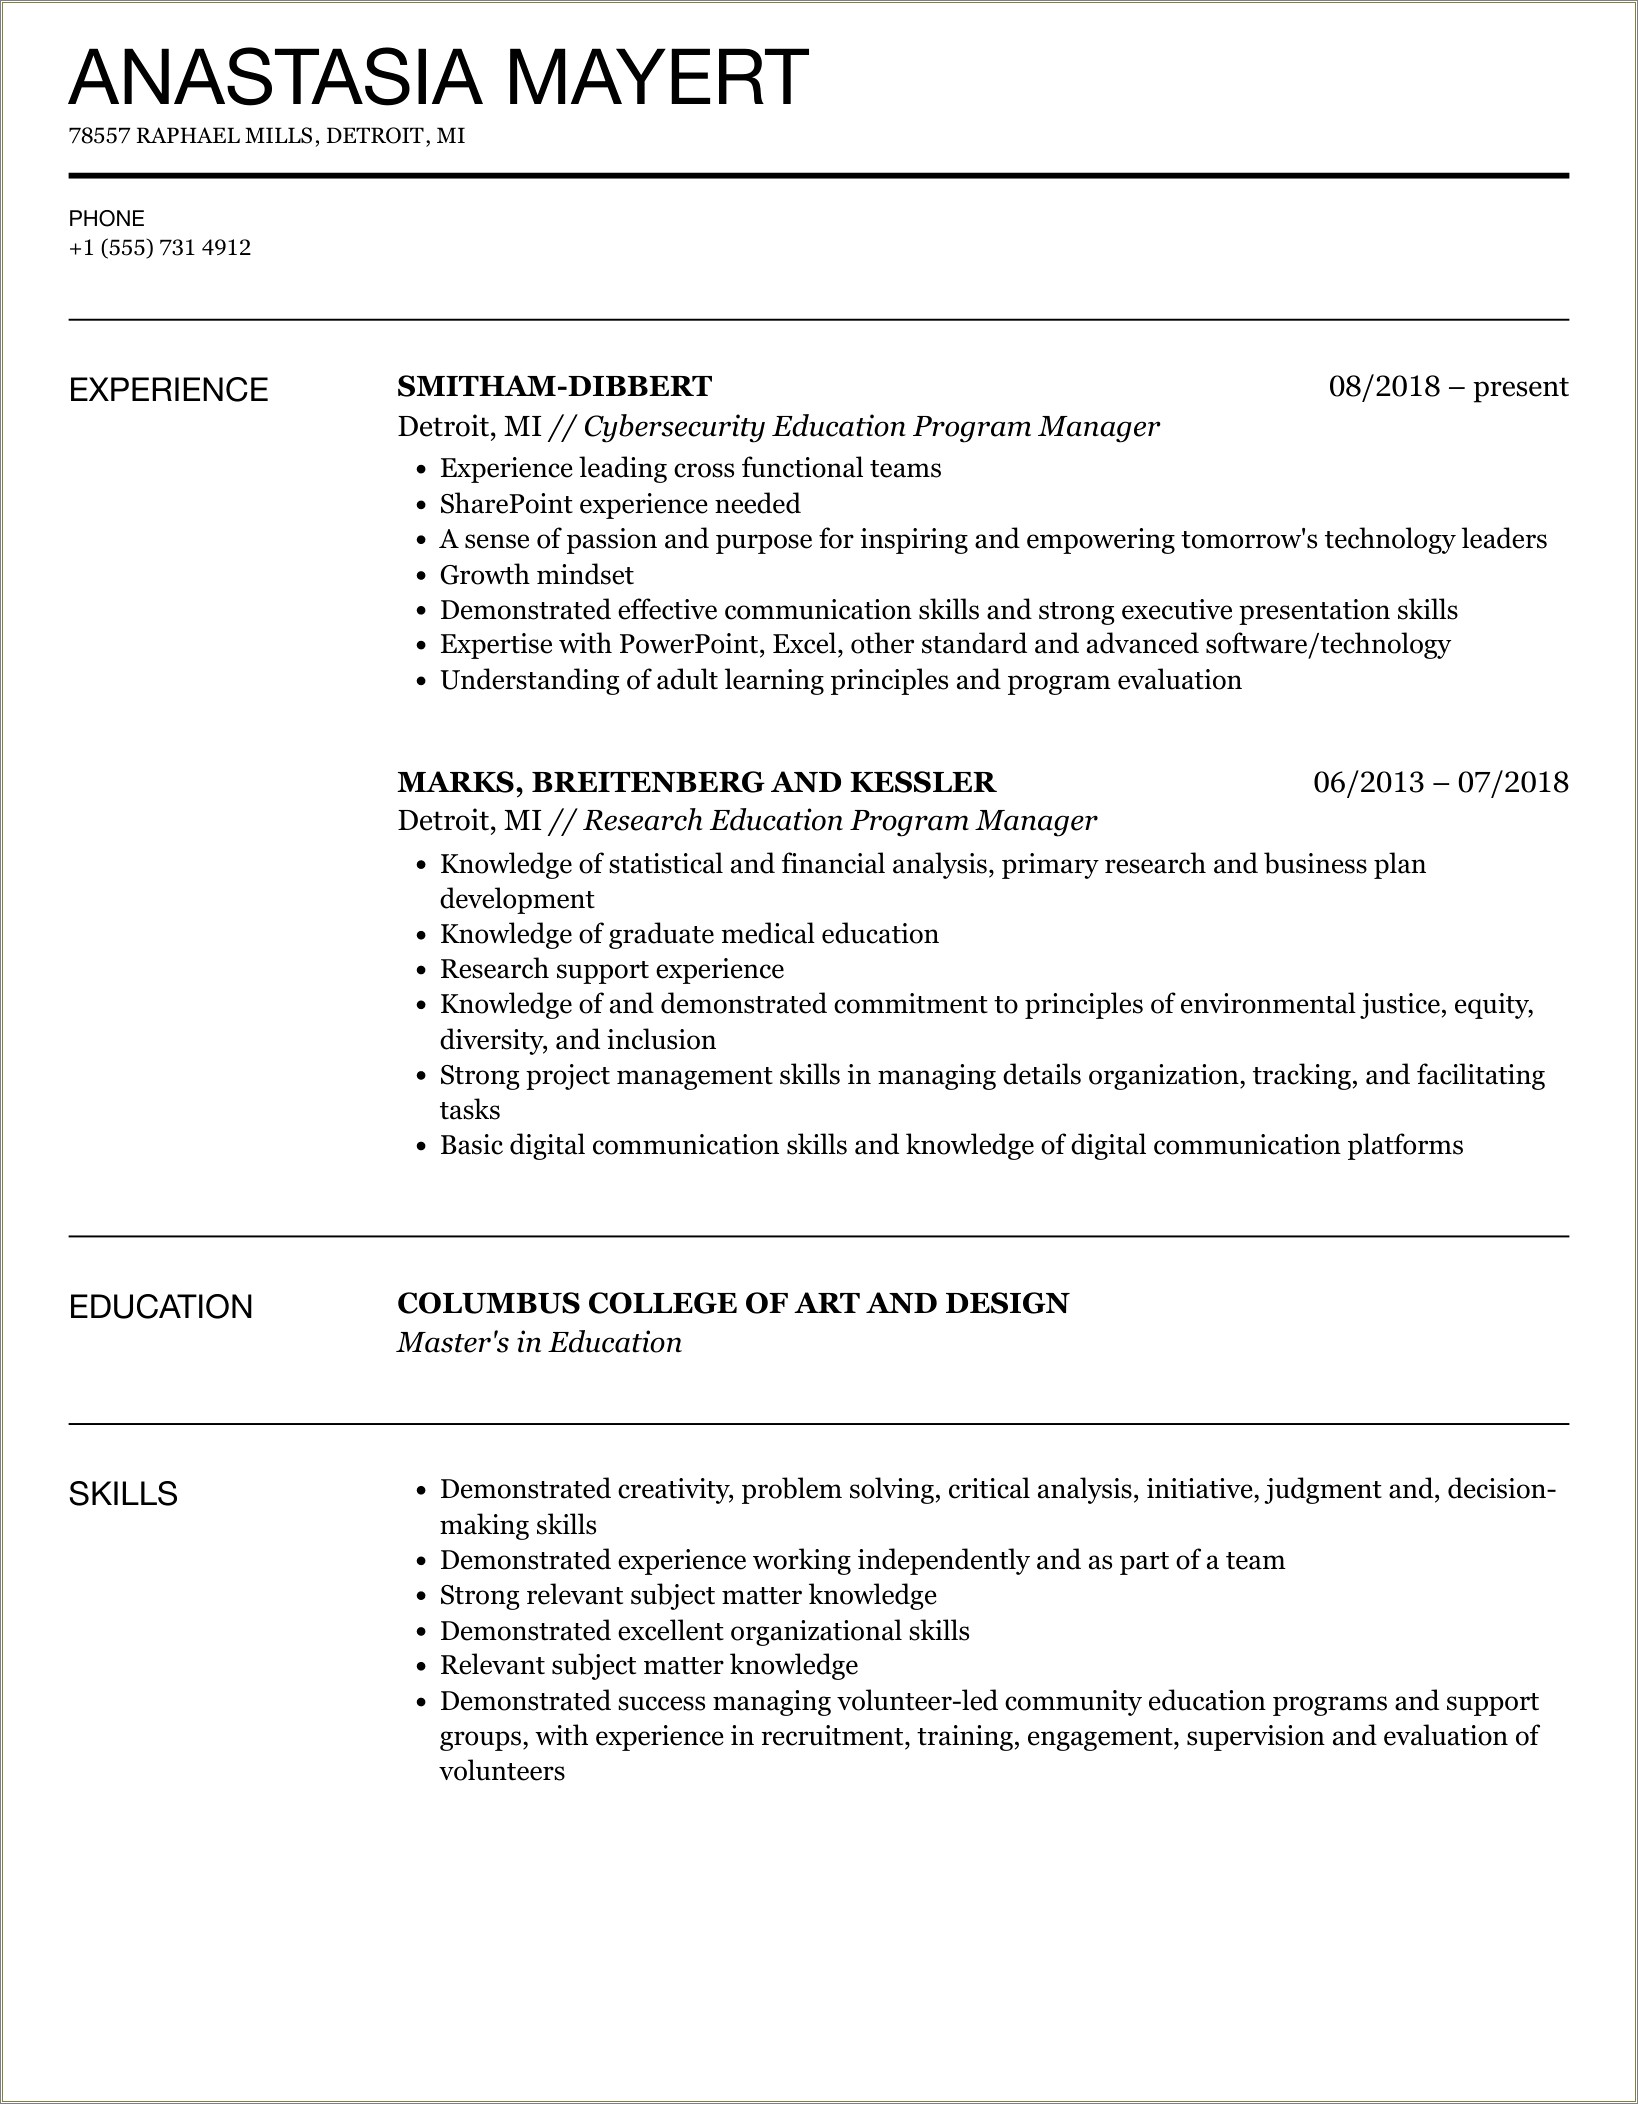 Resume Objective Examples For Education Program Manager